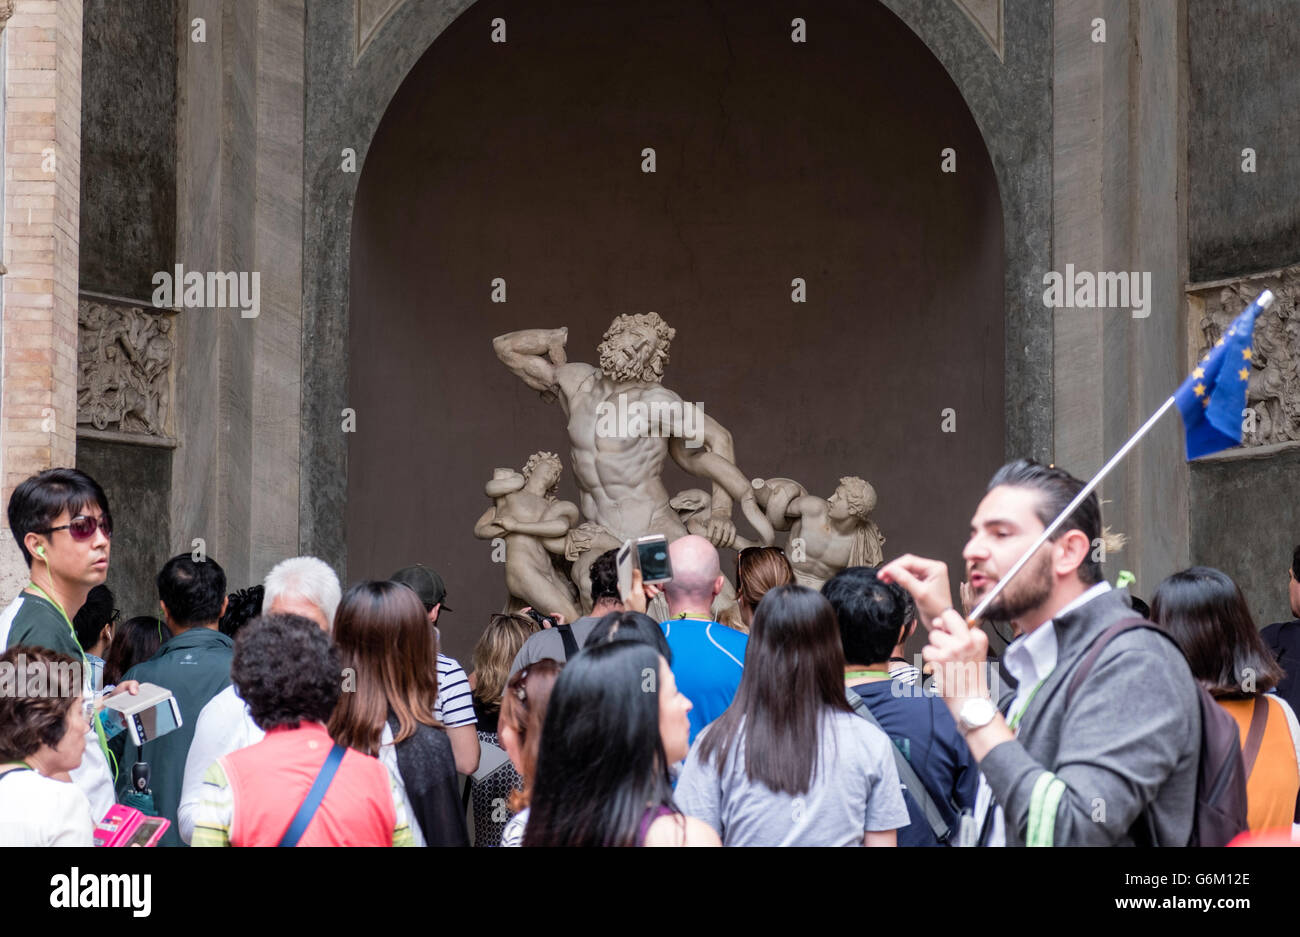 Tourist tour group looking at The Laocošn group sculpture at the Vatican Museum in Rome, Italy Stock Photo